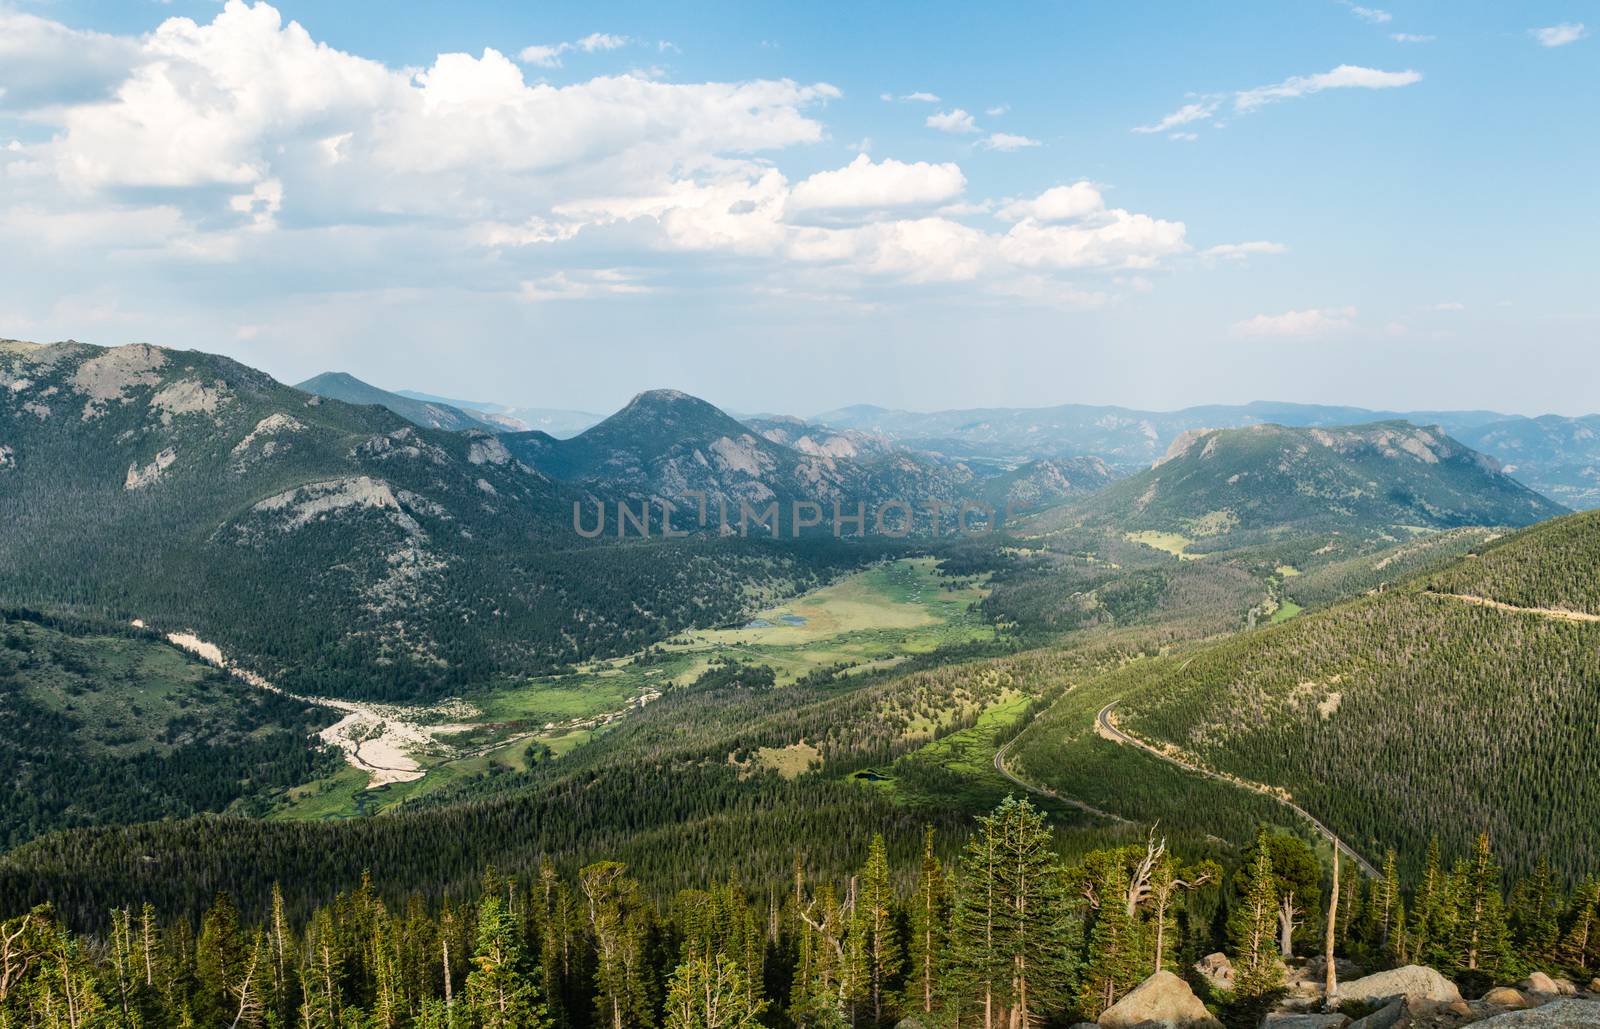 Looking down on Horseshoe Park in the Rocky Mountain National Park, Colorado by Njean